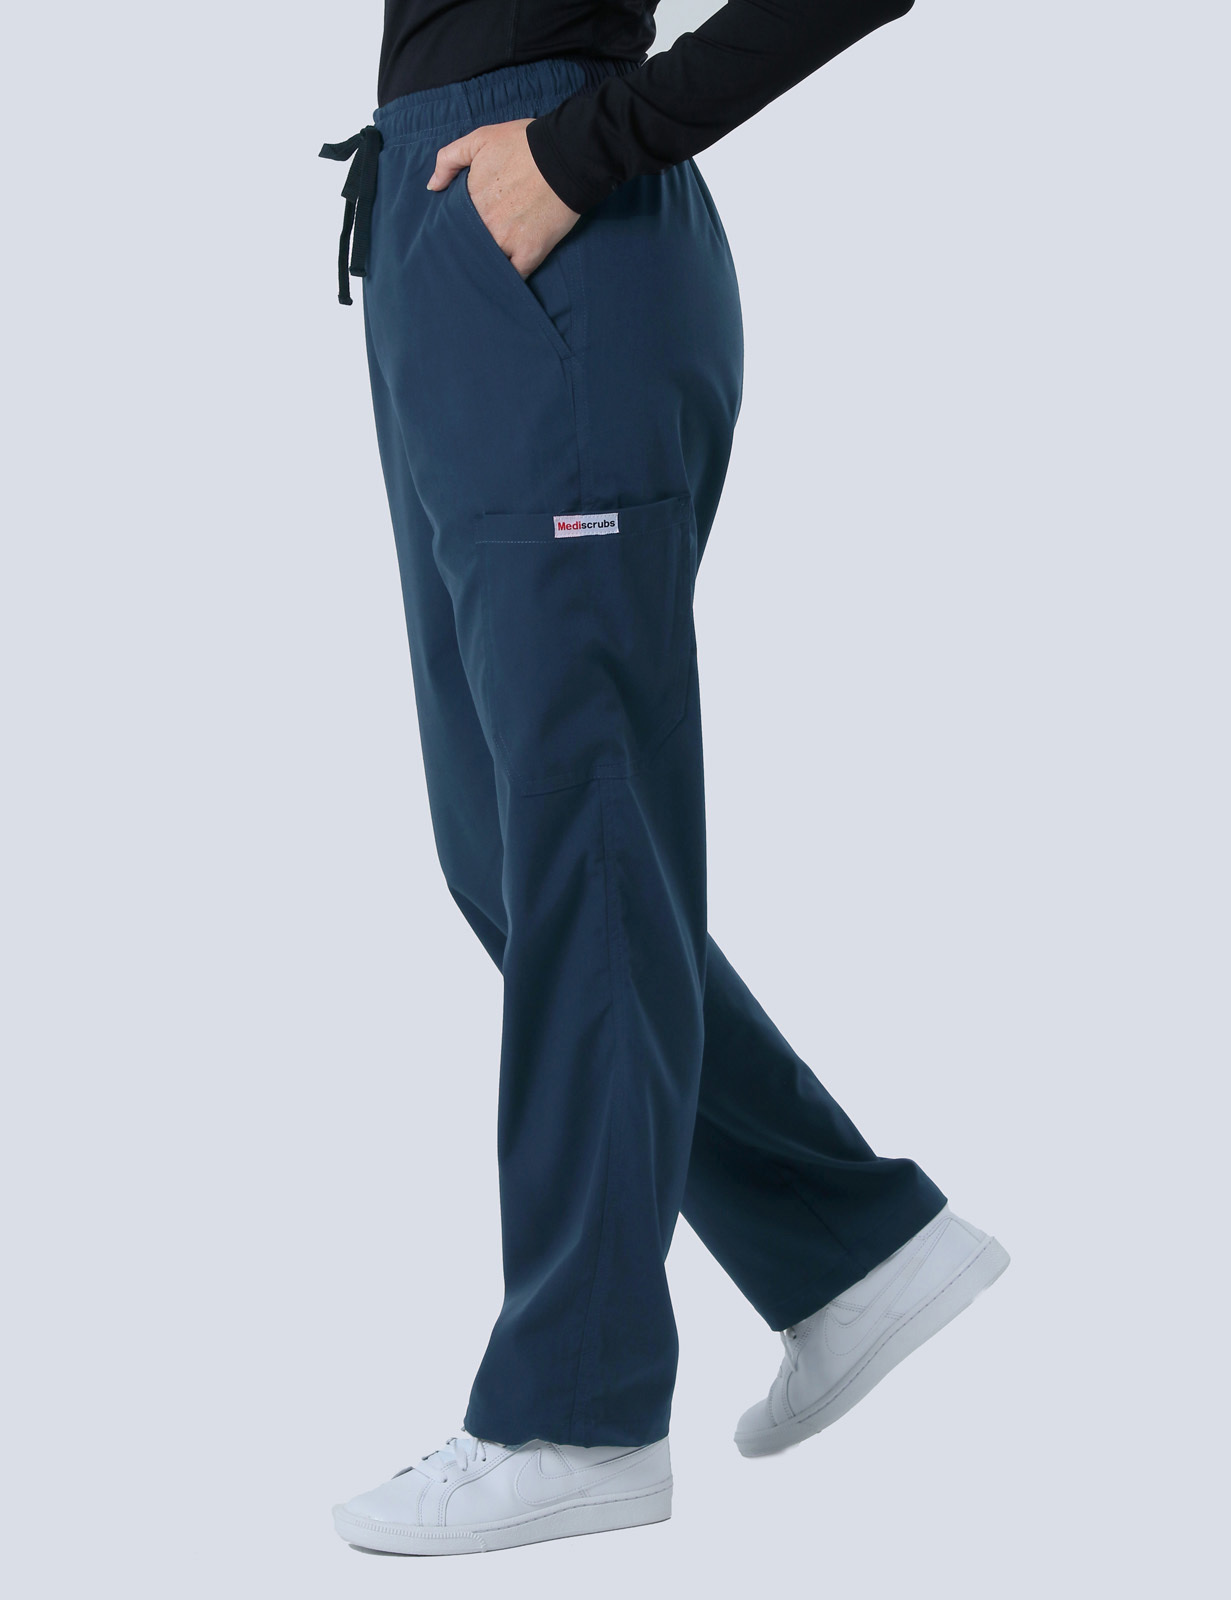 Monash Health - Women's Doctor (Women's Fit Solid Scrub Top and Cargo Pants in Navy incl Logos)